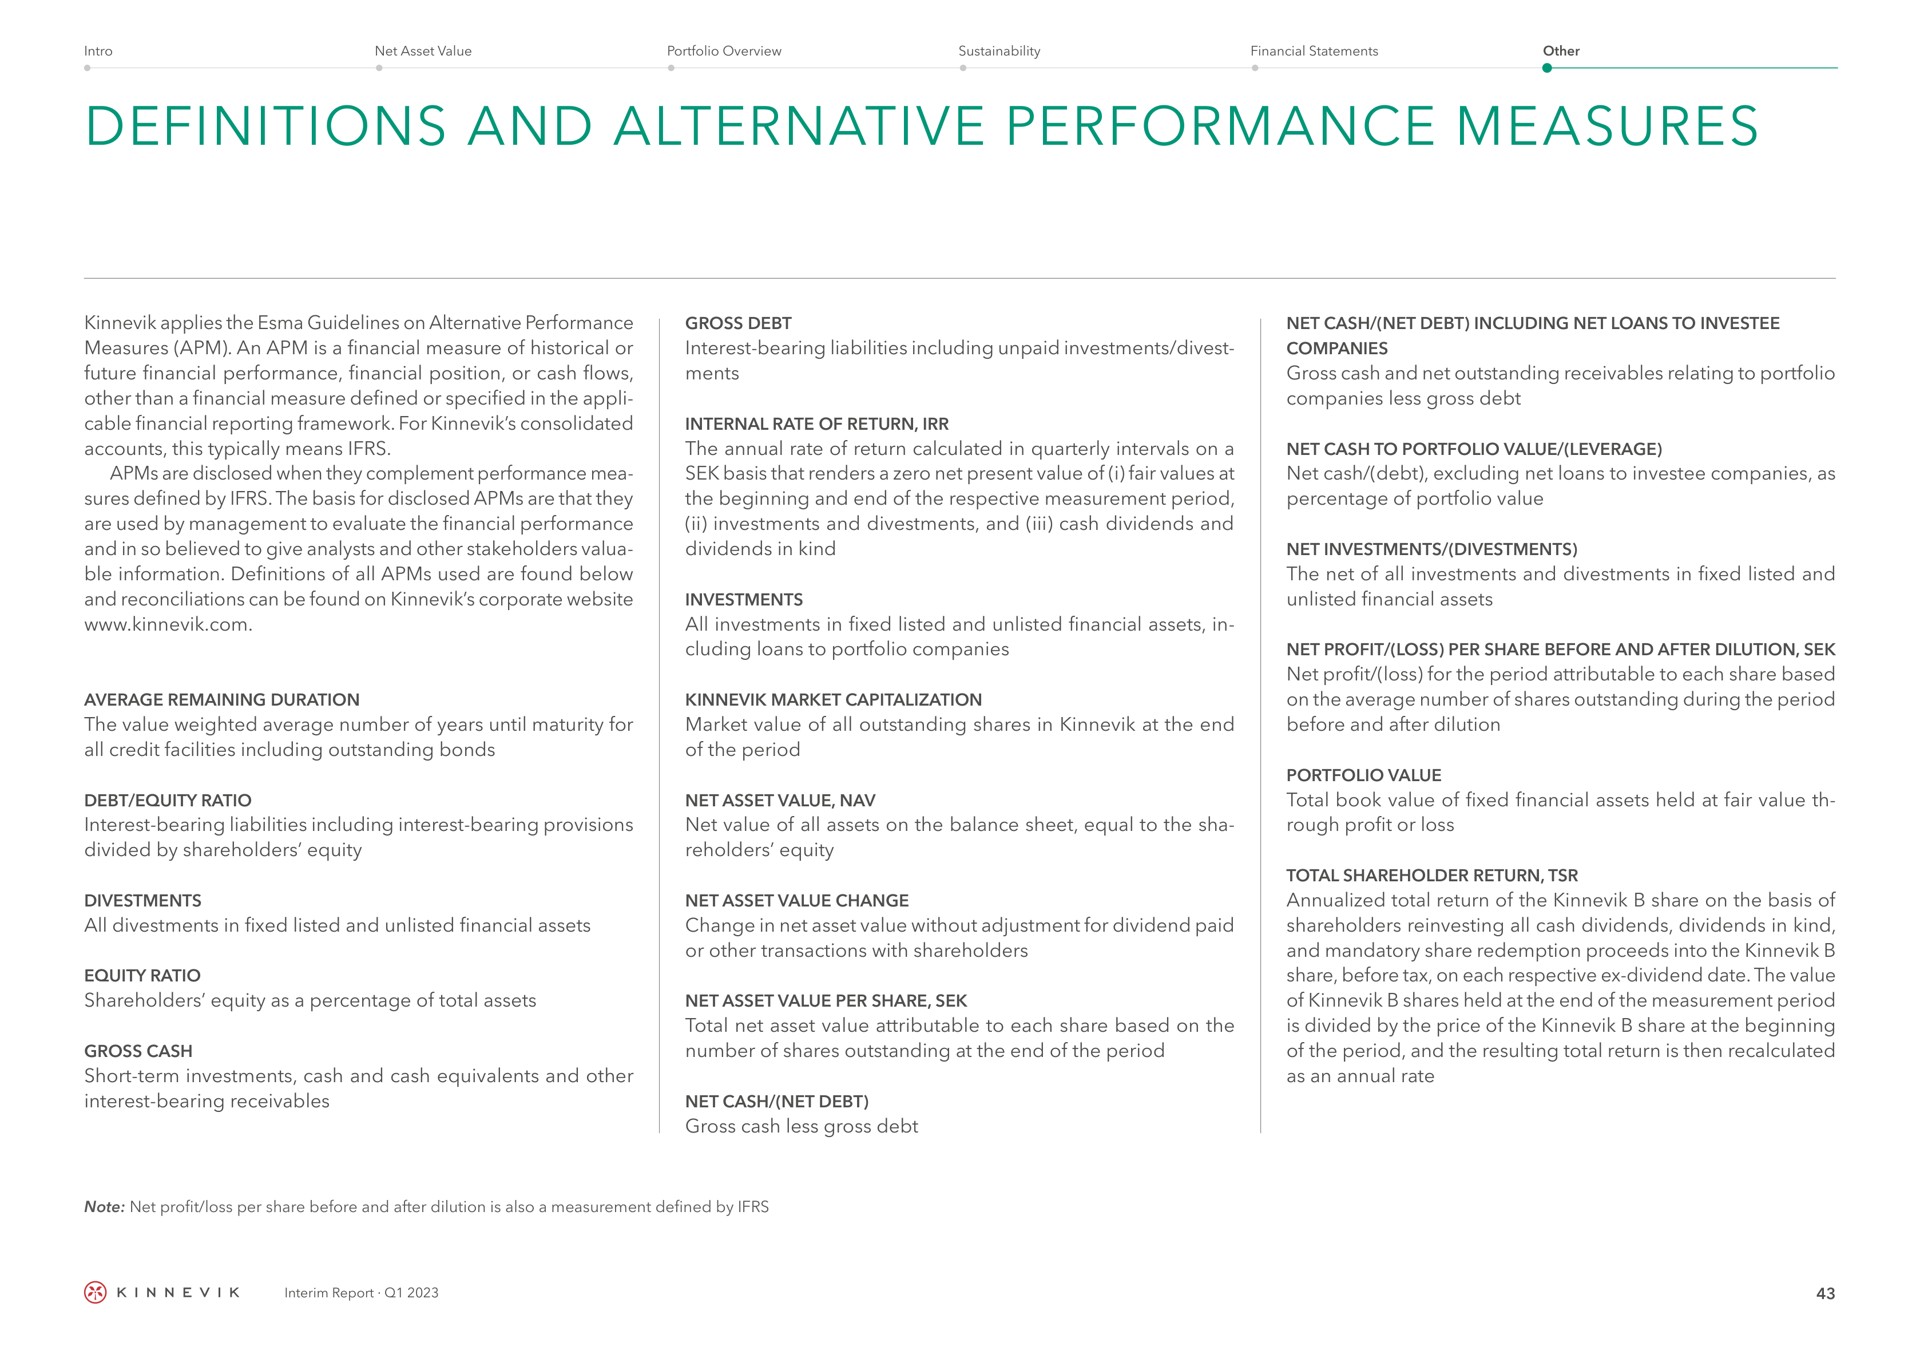 definitions and alternative performance measures applies the guidelines on alternative performance measures an is a financial measure of historical or future financial performance financial position or cash flows other than a financial measure defined or specified in the cable financial reporting framework for consolidated accounts this typically means are disclosed when they complement performance sures defined by the basis for disclosed are that they are used by management to evaluate the financial performance and in so believed to give analysts and other stakeholders information definitions of all used are found below and reconciliations can be found on corporate gross debt interest bearing liabilities including unpaid investments divest internal rate of return the annual rate of return calculated in quarterly intervals on a basis that renders a zero net present value of i fair values at the beginning and end of the respective measurement period investments and and cash dividends and dividends in kind investments all investments in fixed listed and unlisted financial assets in loans to portfolio companies average remaining duration the value weighted average number of years until maturity for all credit facilities including outstanding bonds market capitalization market value of all outstanding shares in at the end of the period debt equity ratio interest bearing liabilities including interest bearing provisions divided by share holders equity net asset value net value of all assets on the balance sheet equal to the sha equity all in fixed listed and unlisted financial assets equity ratio shareholders equity as a percentage of total assets gross cash short term investments cash and cash equivalents and other interest bearing receivables net asset value change change in net asset value without adjustment for dividend paid or other transactions with shareholders net asset value per share total net asset value attributable to each share based on the number of shares outstanding at the end of the period net cash net debt gross cash less gross debt net cash net debt including net loans to companies gross cash and net outstanding receivables relating to portfolio companies less gross debt net cash to portfolio value leverage net cash debt excluding net loans to companies as percentage of portfolio value net investments the net of all investments and in fixed listed and unlisted financial assets net profit loss per share before and after dilution net profit loss for the period attributable to each share based on the average number of shares outstanding during the period before and after dilution total book value of fixed financial assets held at fair value rough profit or loss total shareholder return total return of the share on the basis of shareholders all cash dividends dividends in kind and mandatory share redemption proceeds into the share before tax on each respective dividend date the value of shares held at the end of the measurement period is divided by the price of the share at the beginning of the period and the resulting total return is then recalculated as an annual rate | Kinnevik